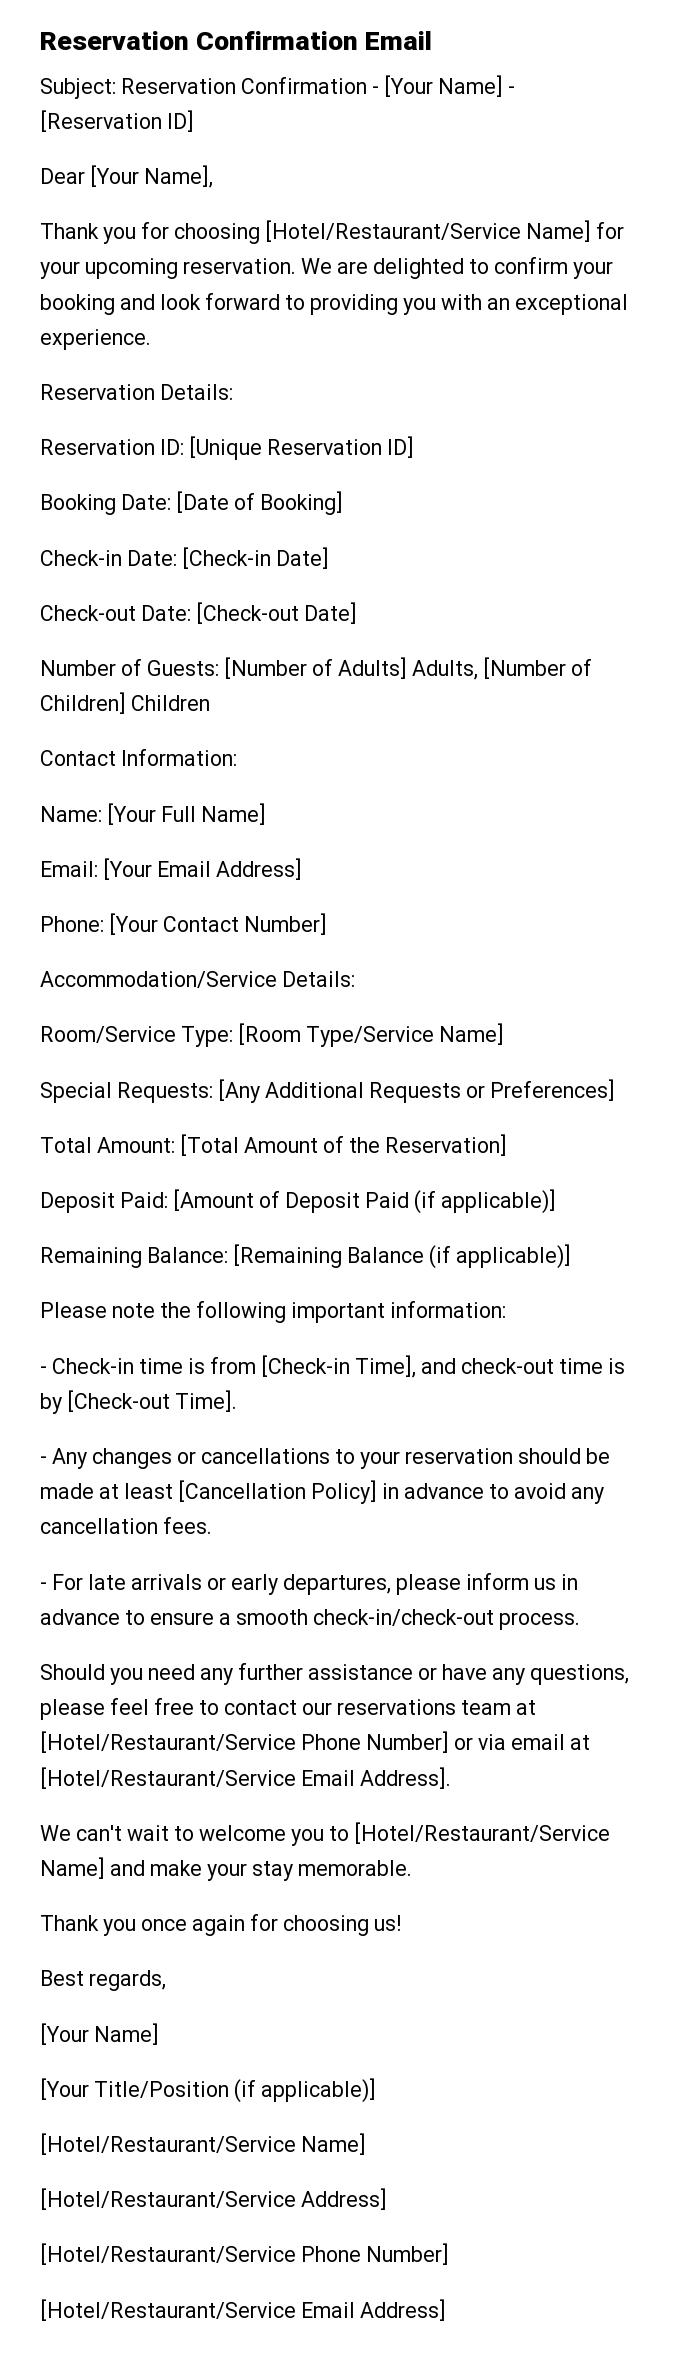 Reservation Confirmation Email